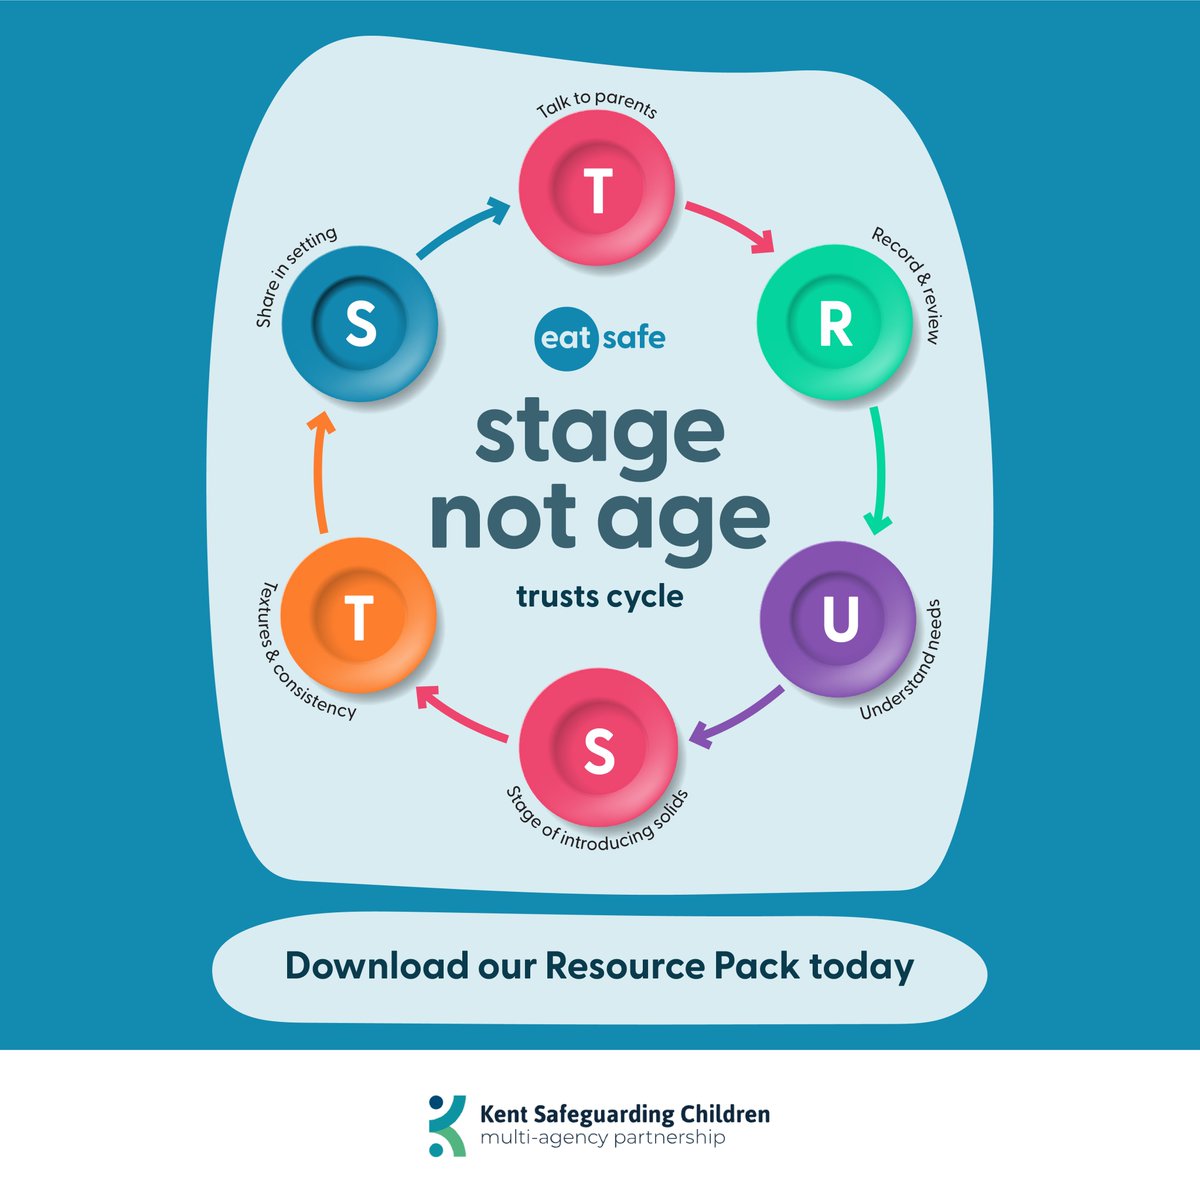 Have you heard of the TRUST cycle? This is a great way to establish safe eating in your early years setting to reduce choking a potential harm. Do you require additional assistance? 📚Visit kscmp.org.uk/guidance/eatsa… to find out more and get your resources pack. 2/2